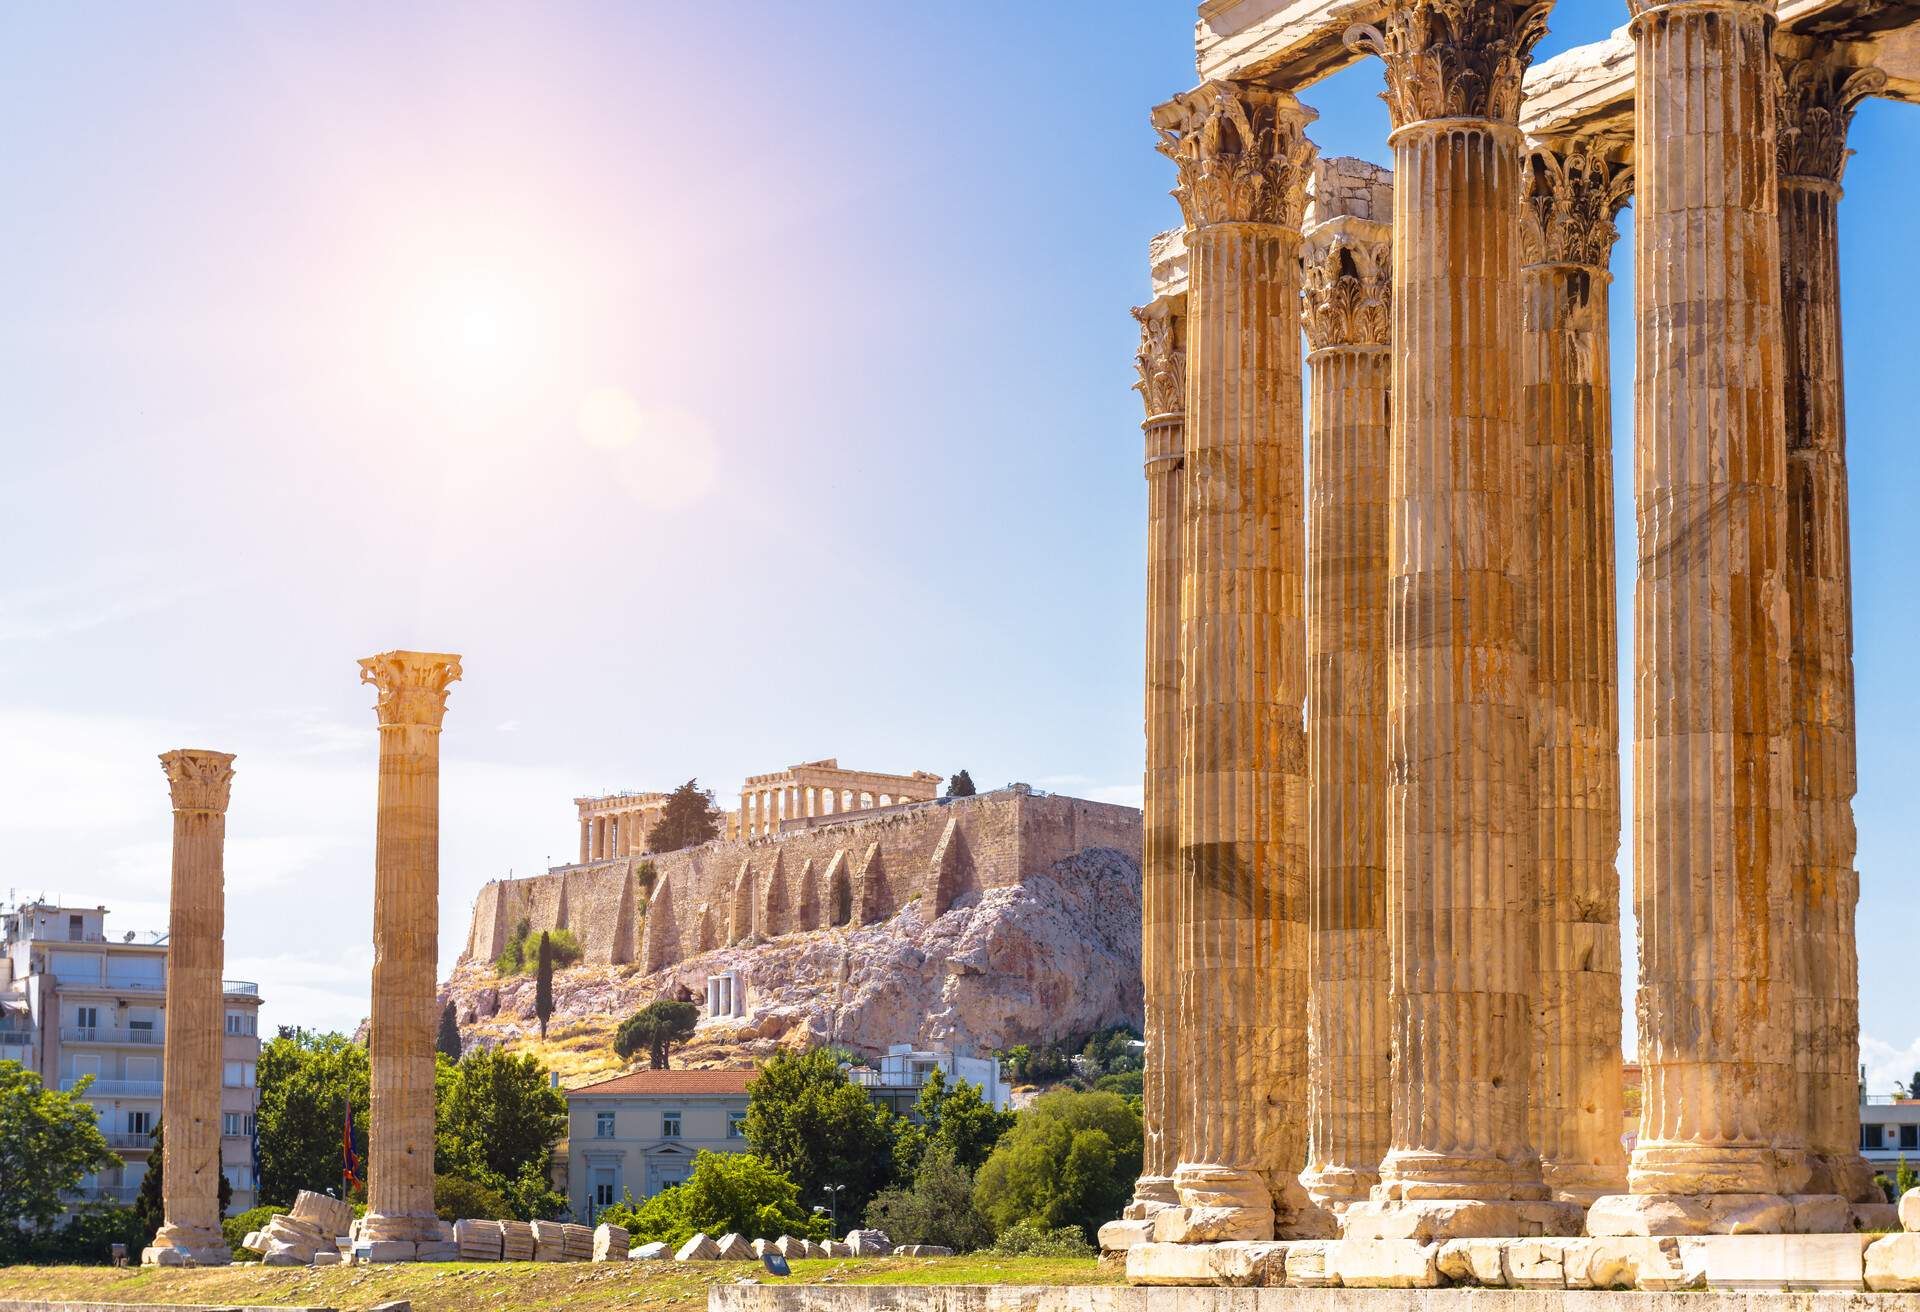 Zeus temple overlooking Acropolis, Athens, Greece. These are famous landmarks of Athens. Sunny view of Ancient Greek ruins, great columns of classical building in Athens city center. Travel concept.